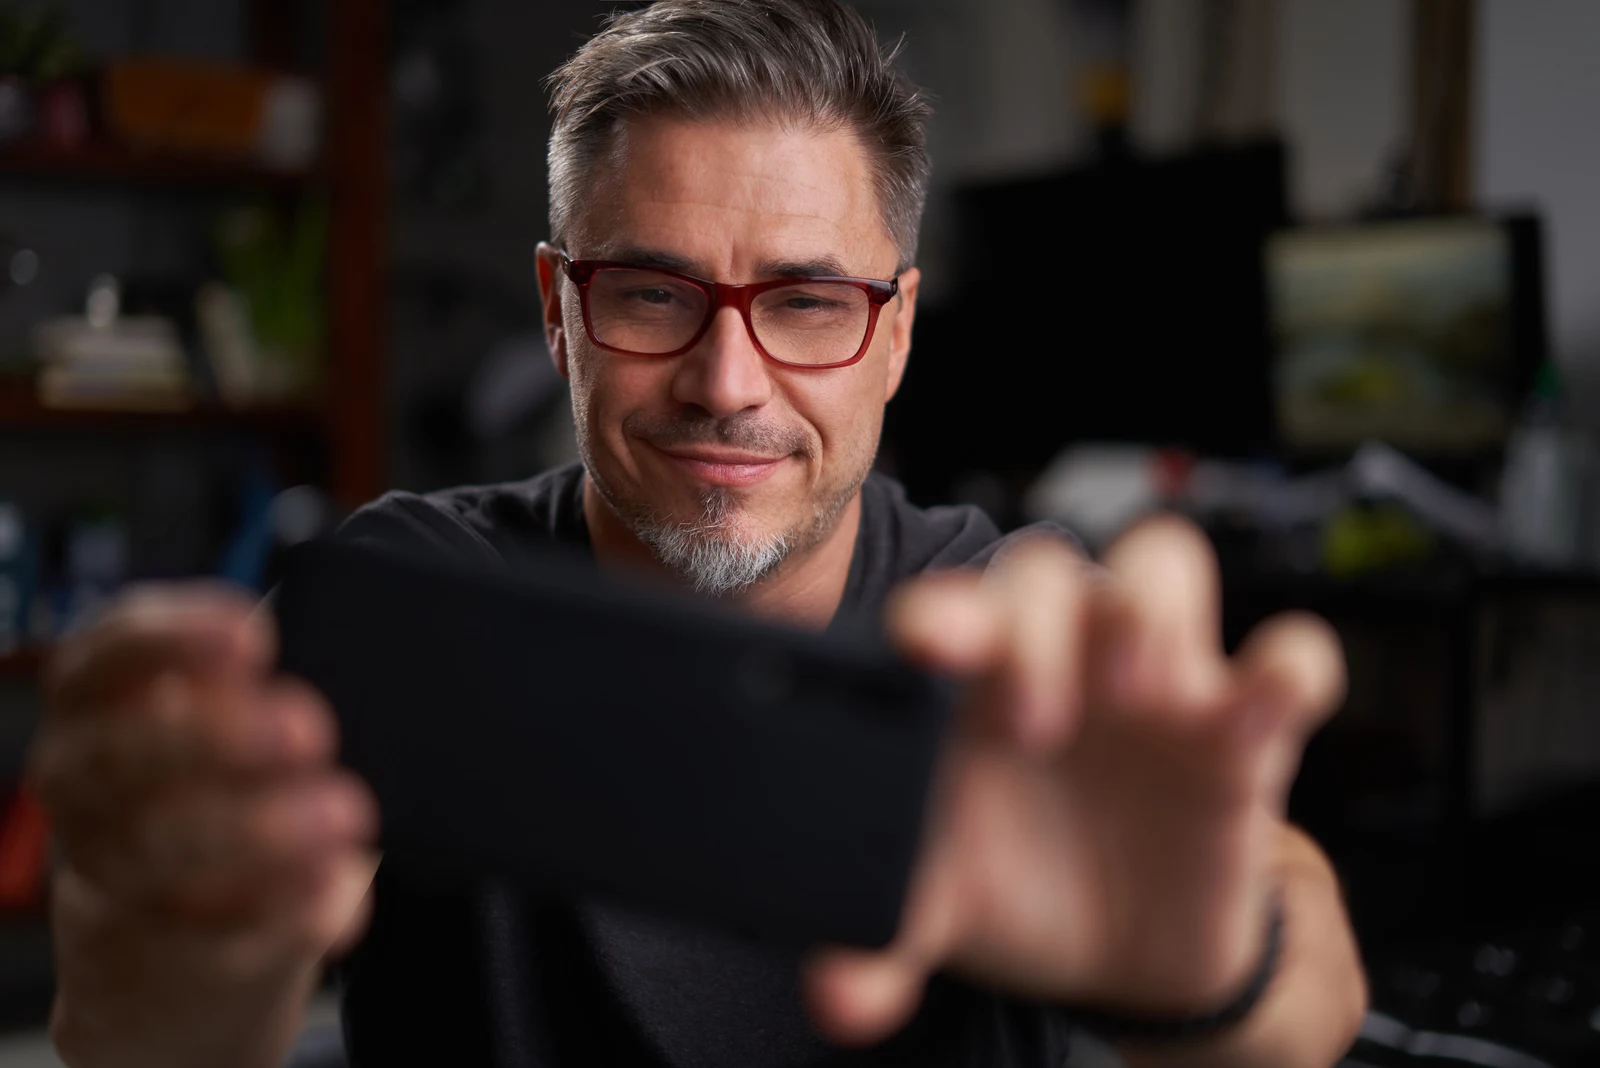 man with glasses taking selfie